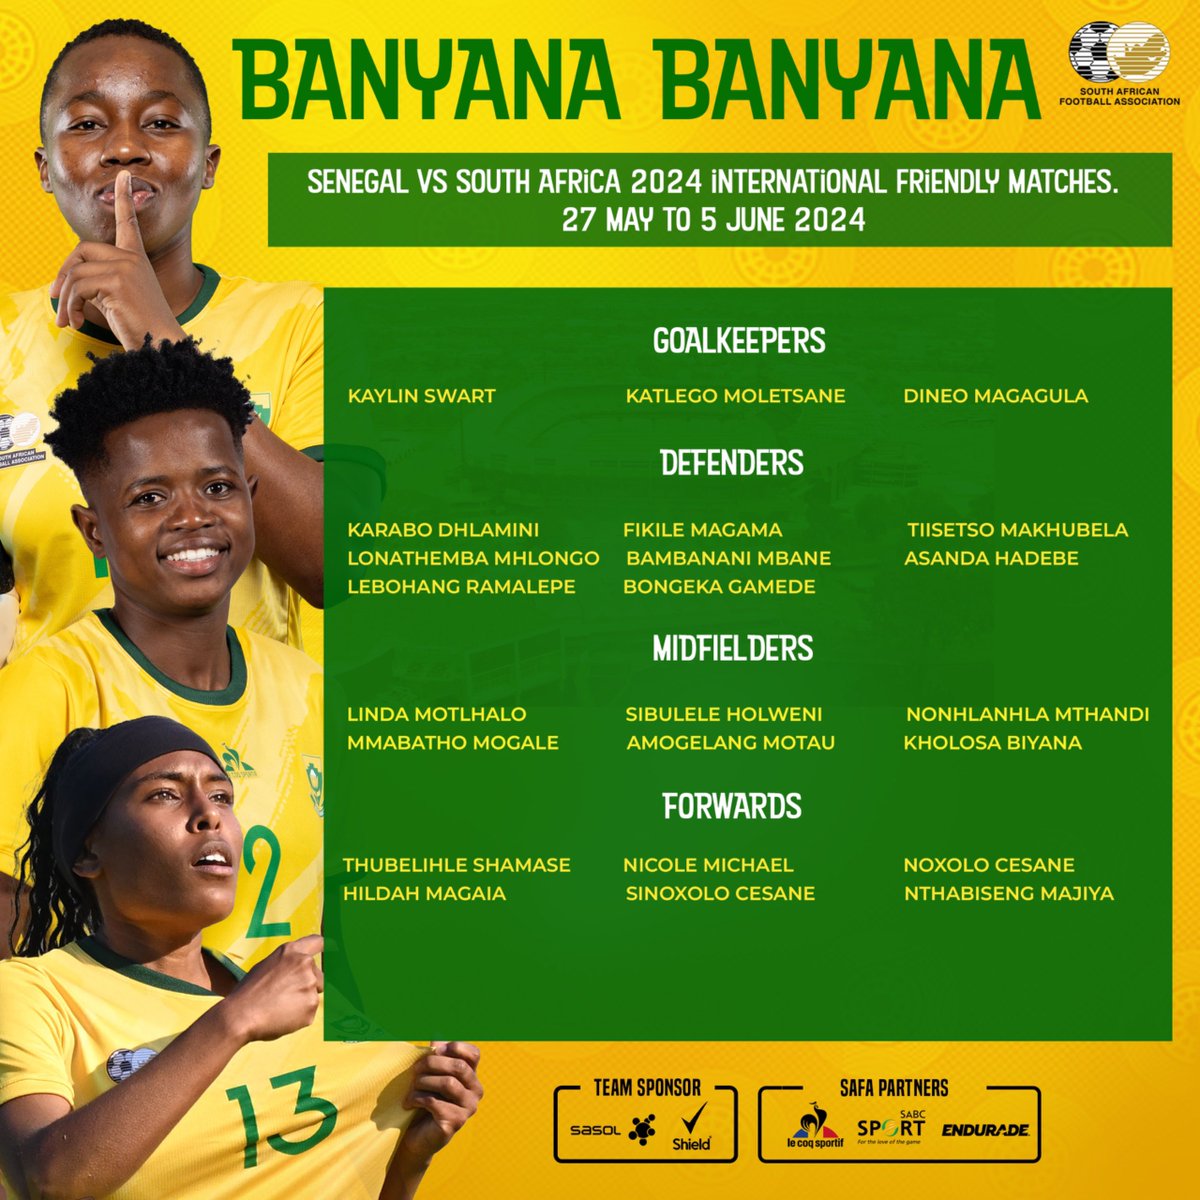 Banyana Banyana🇿🇦 23-member squad to take on Senegal 🇸🇳 in two International Friendly Matches. #LiveTheImpossible